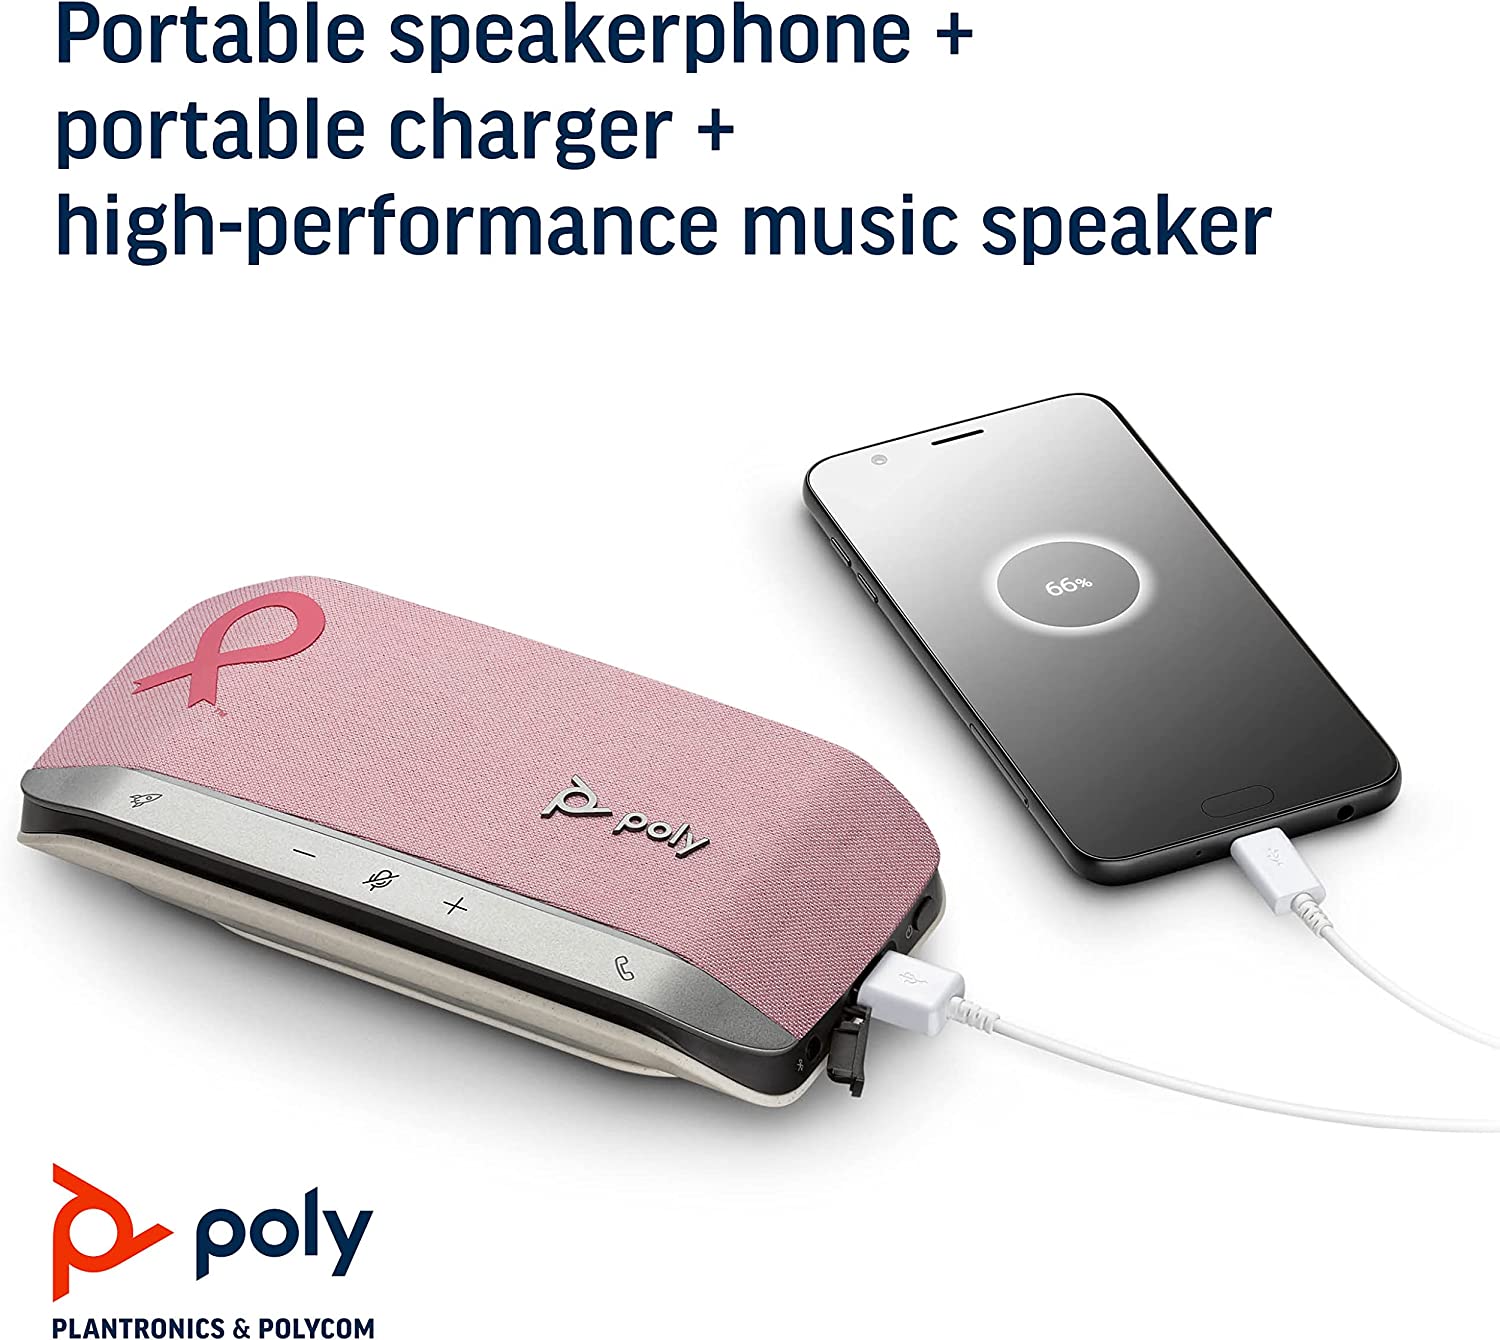 Poly Sync 20 USB-A Smart Speakerphone (Plantronics) - Personal Portable Speakerphone - Noise & Echo Reduction - Connect to Cell Phone via Bluetooth and PC/Mac via USB-A Cable - Teams Certified